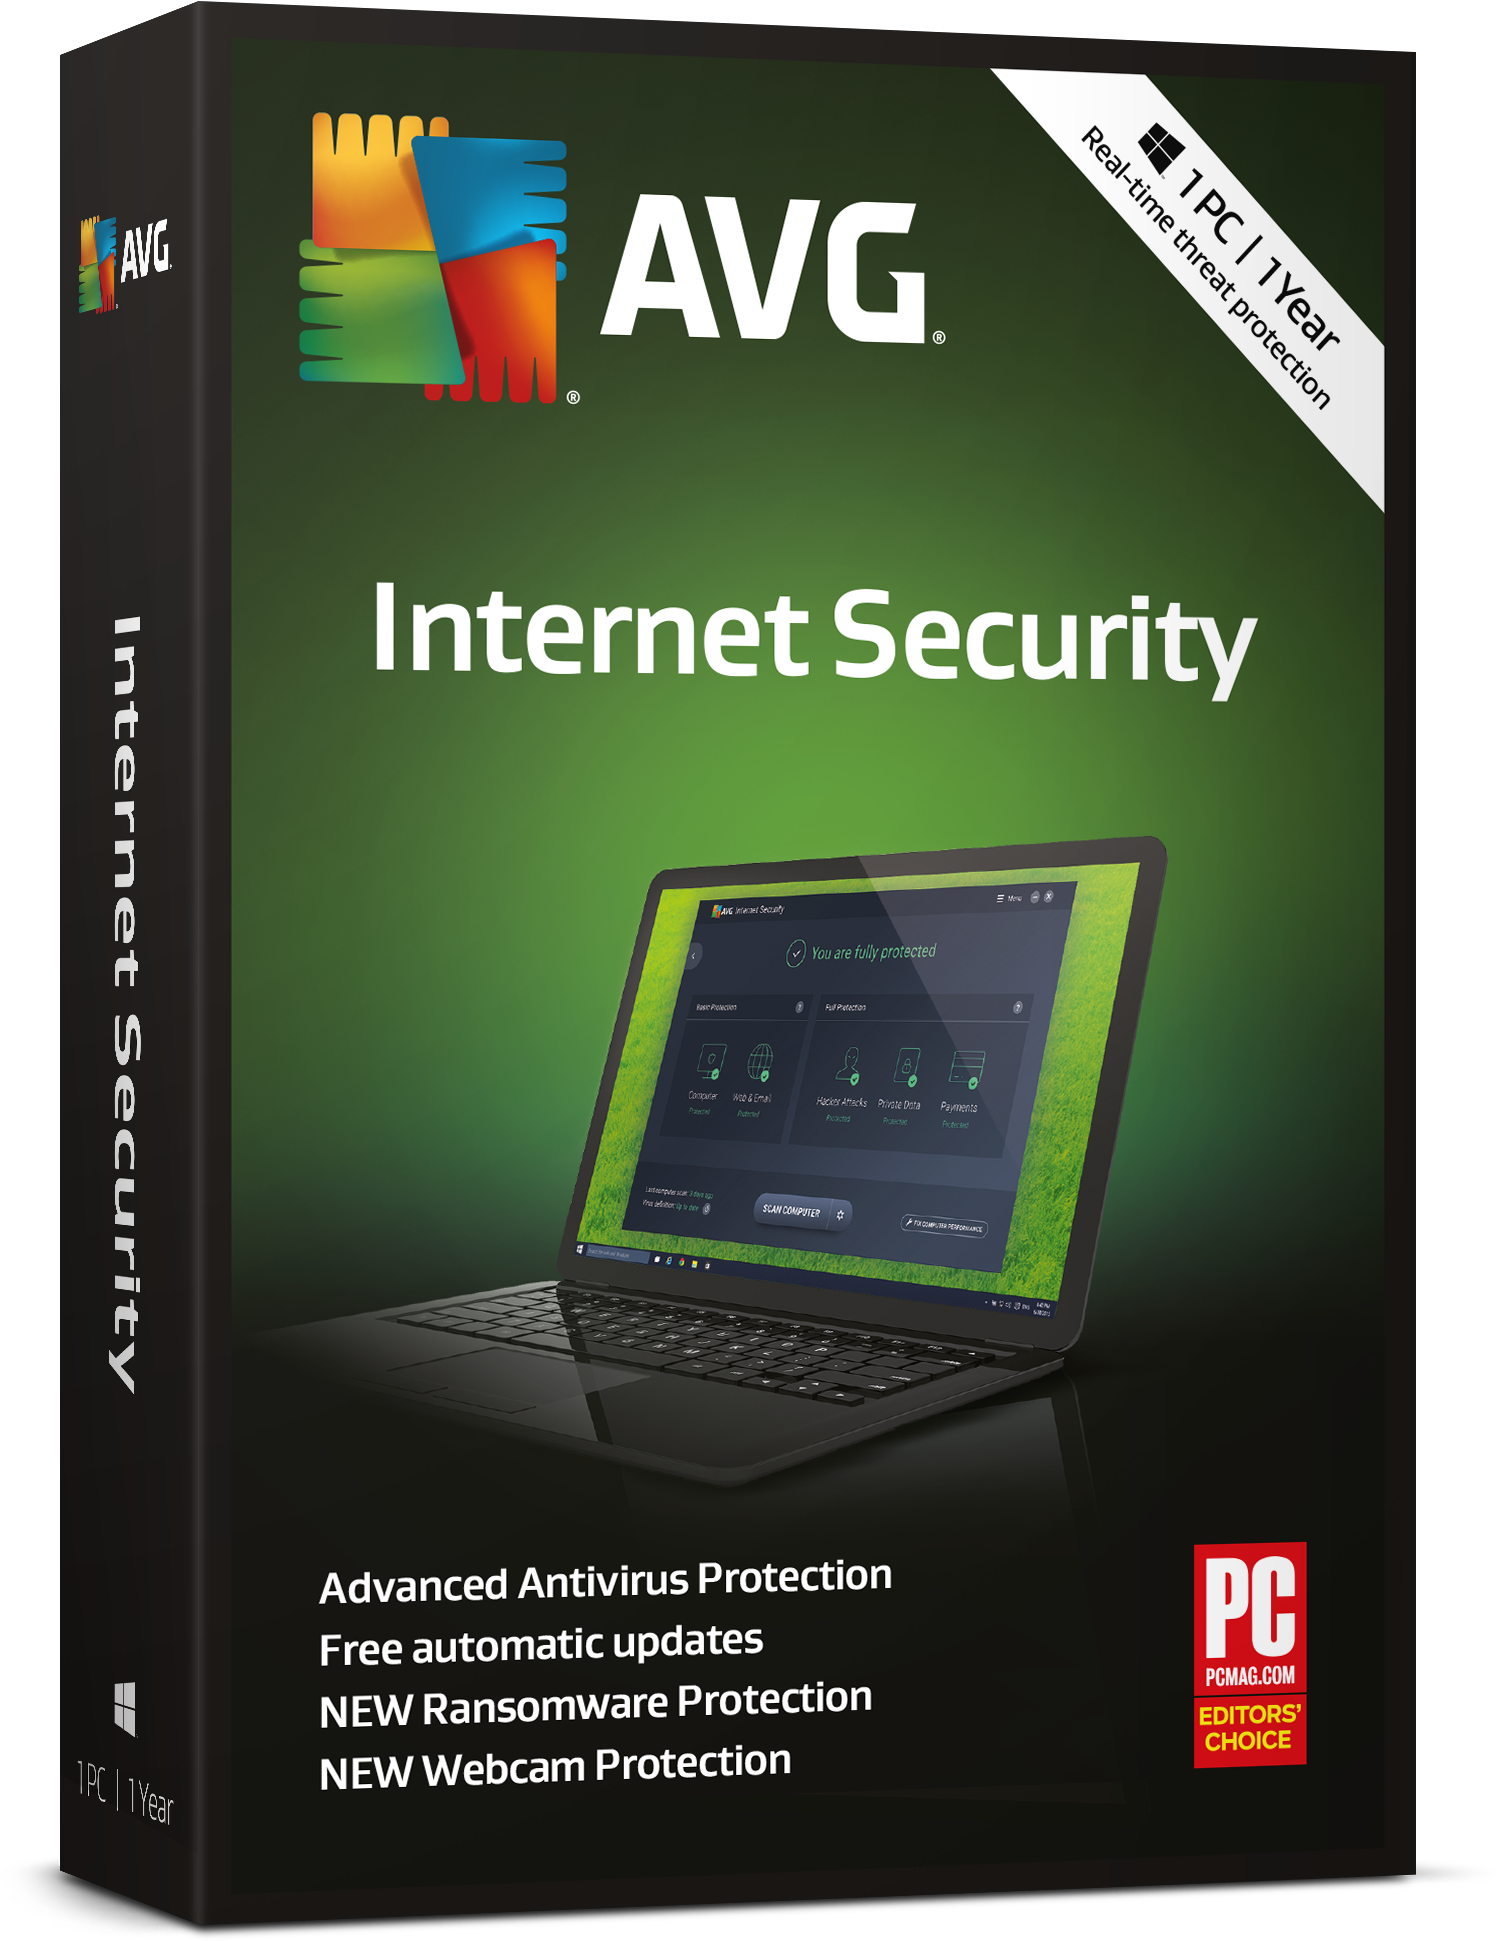 AVG Internet Security 3 Years License